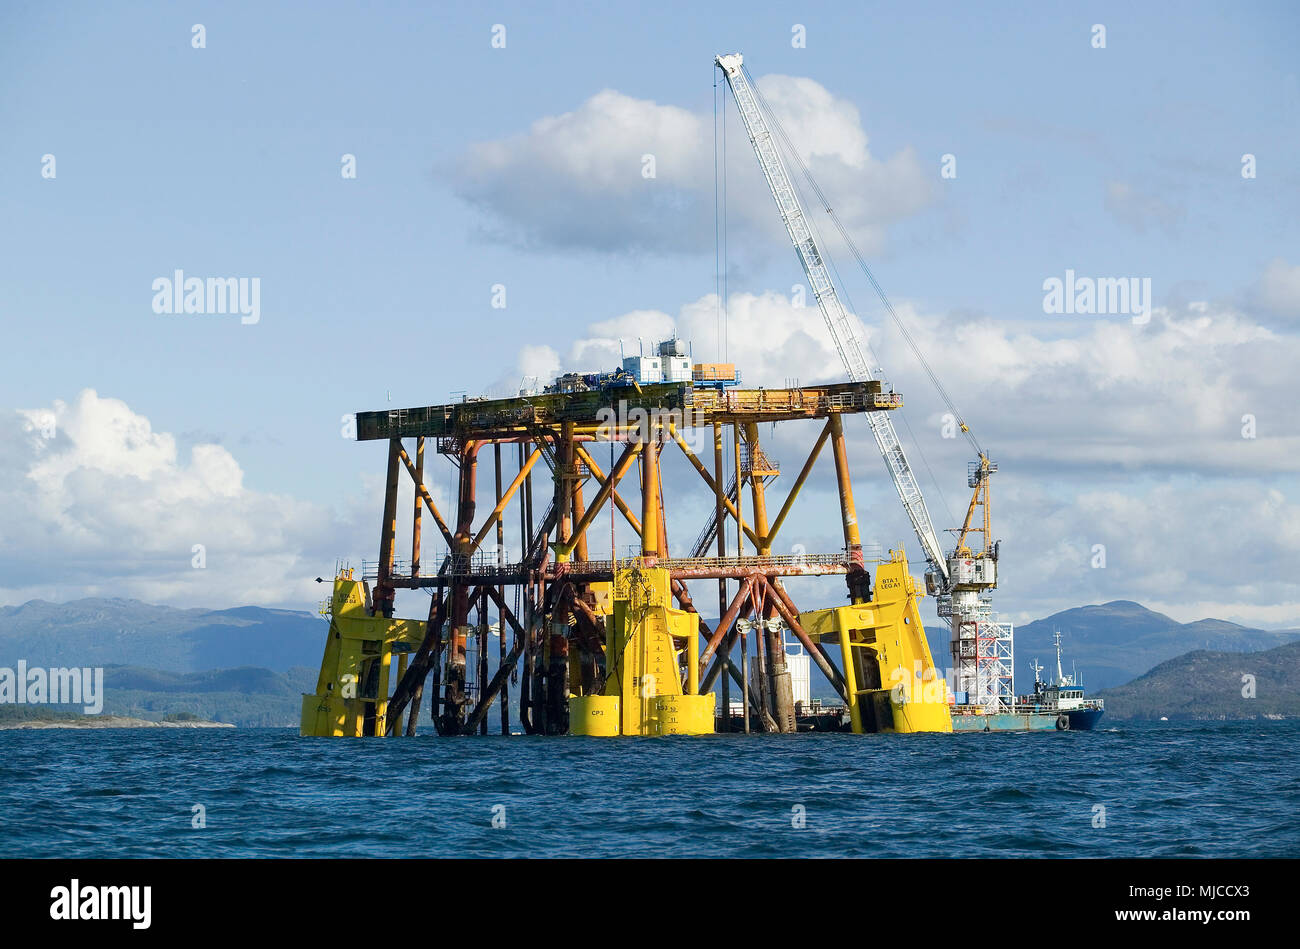 Construction of a new offshore oil drilling rig in Norway Stock Photo